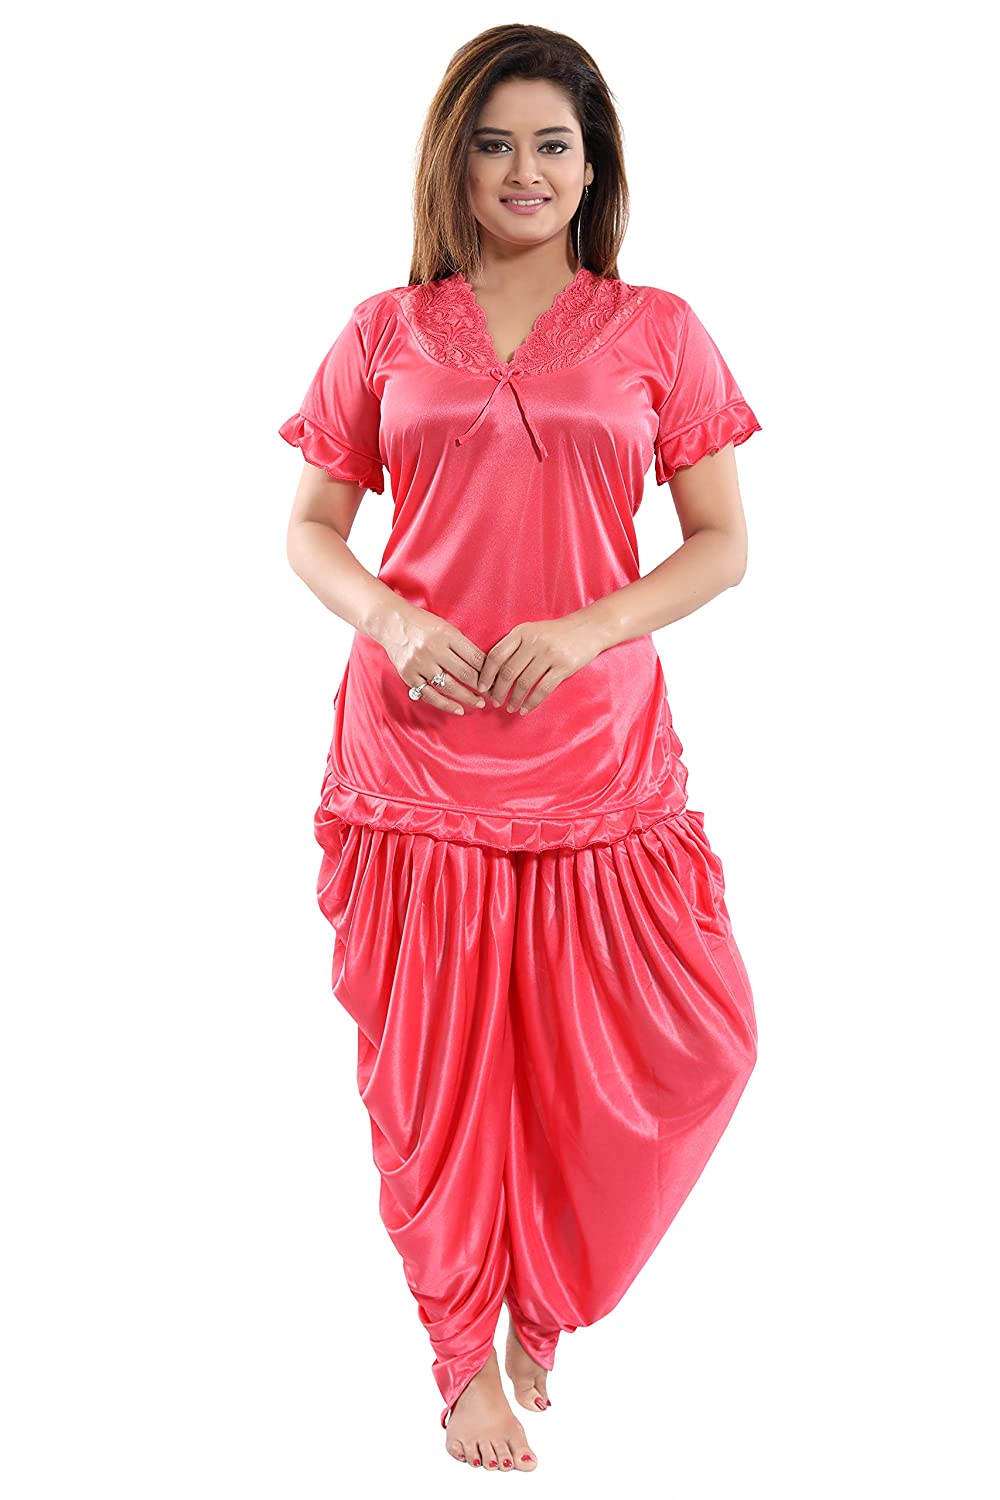 Fashigo Women's Patiala Top and Pyjama Set (Free Size) -  nighties and night dresses in Sri Lanka from Arcade Online Shopping - Just Rs. 4199!